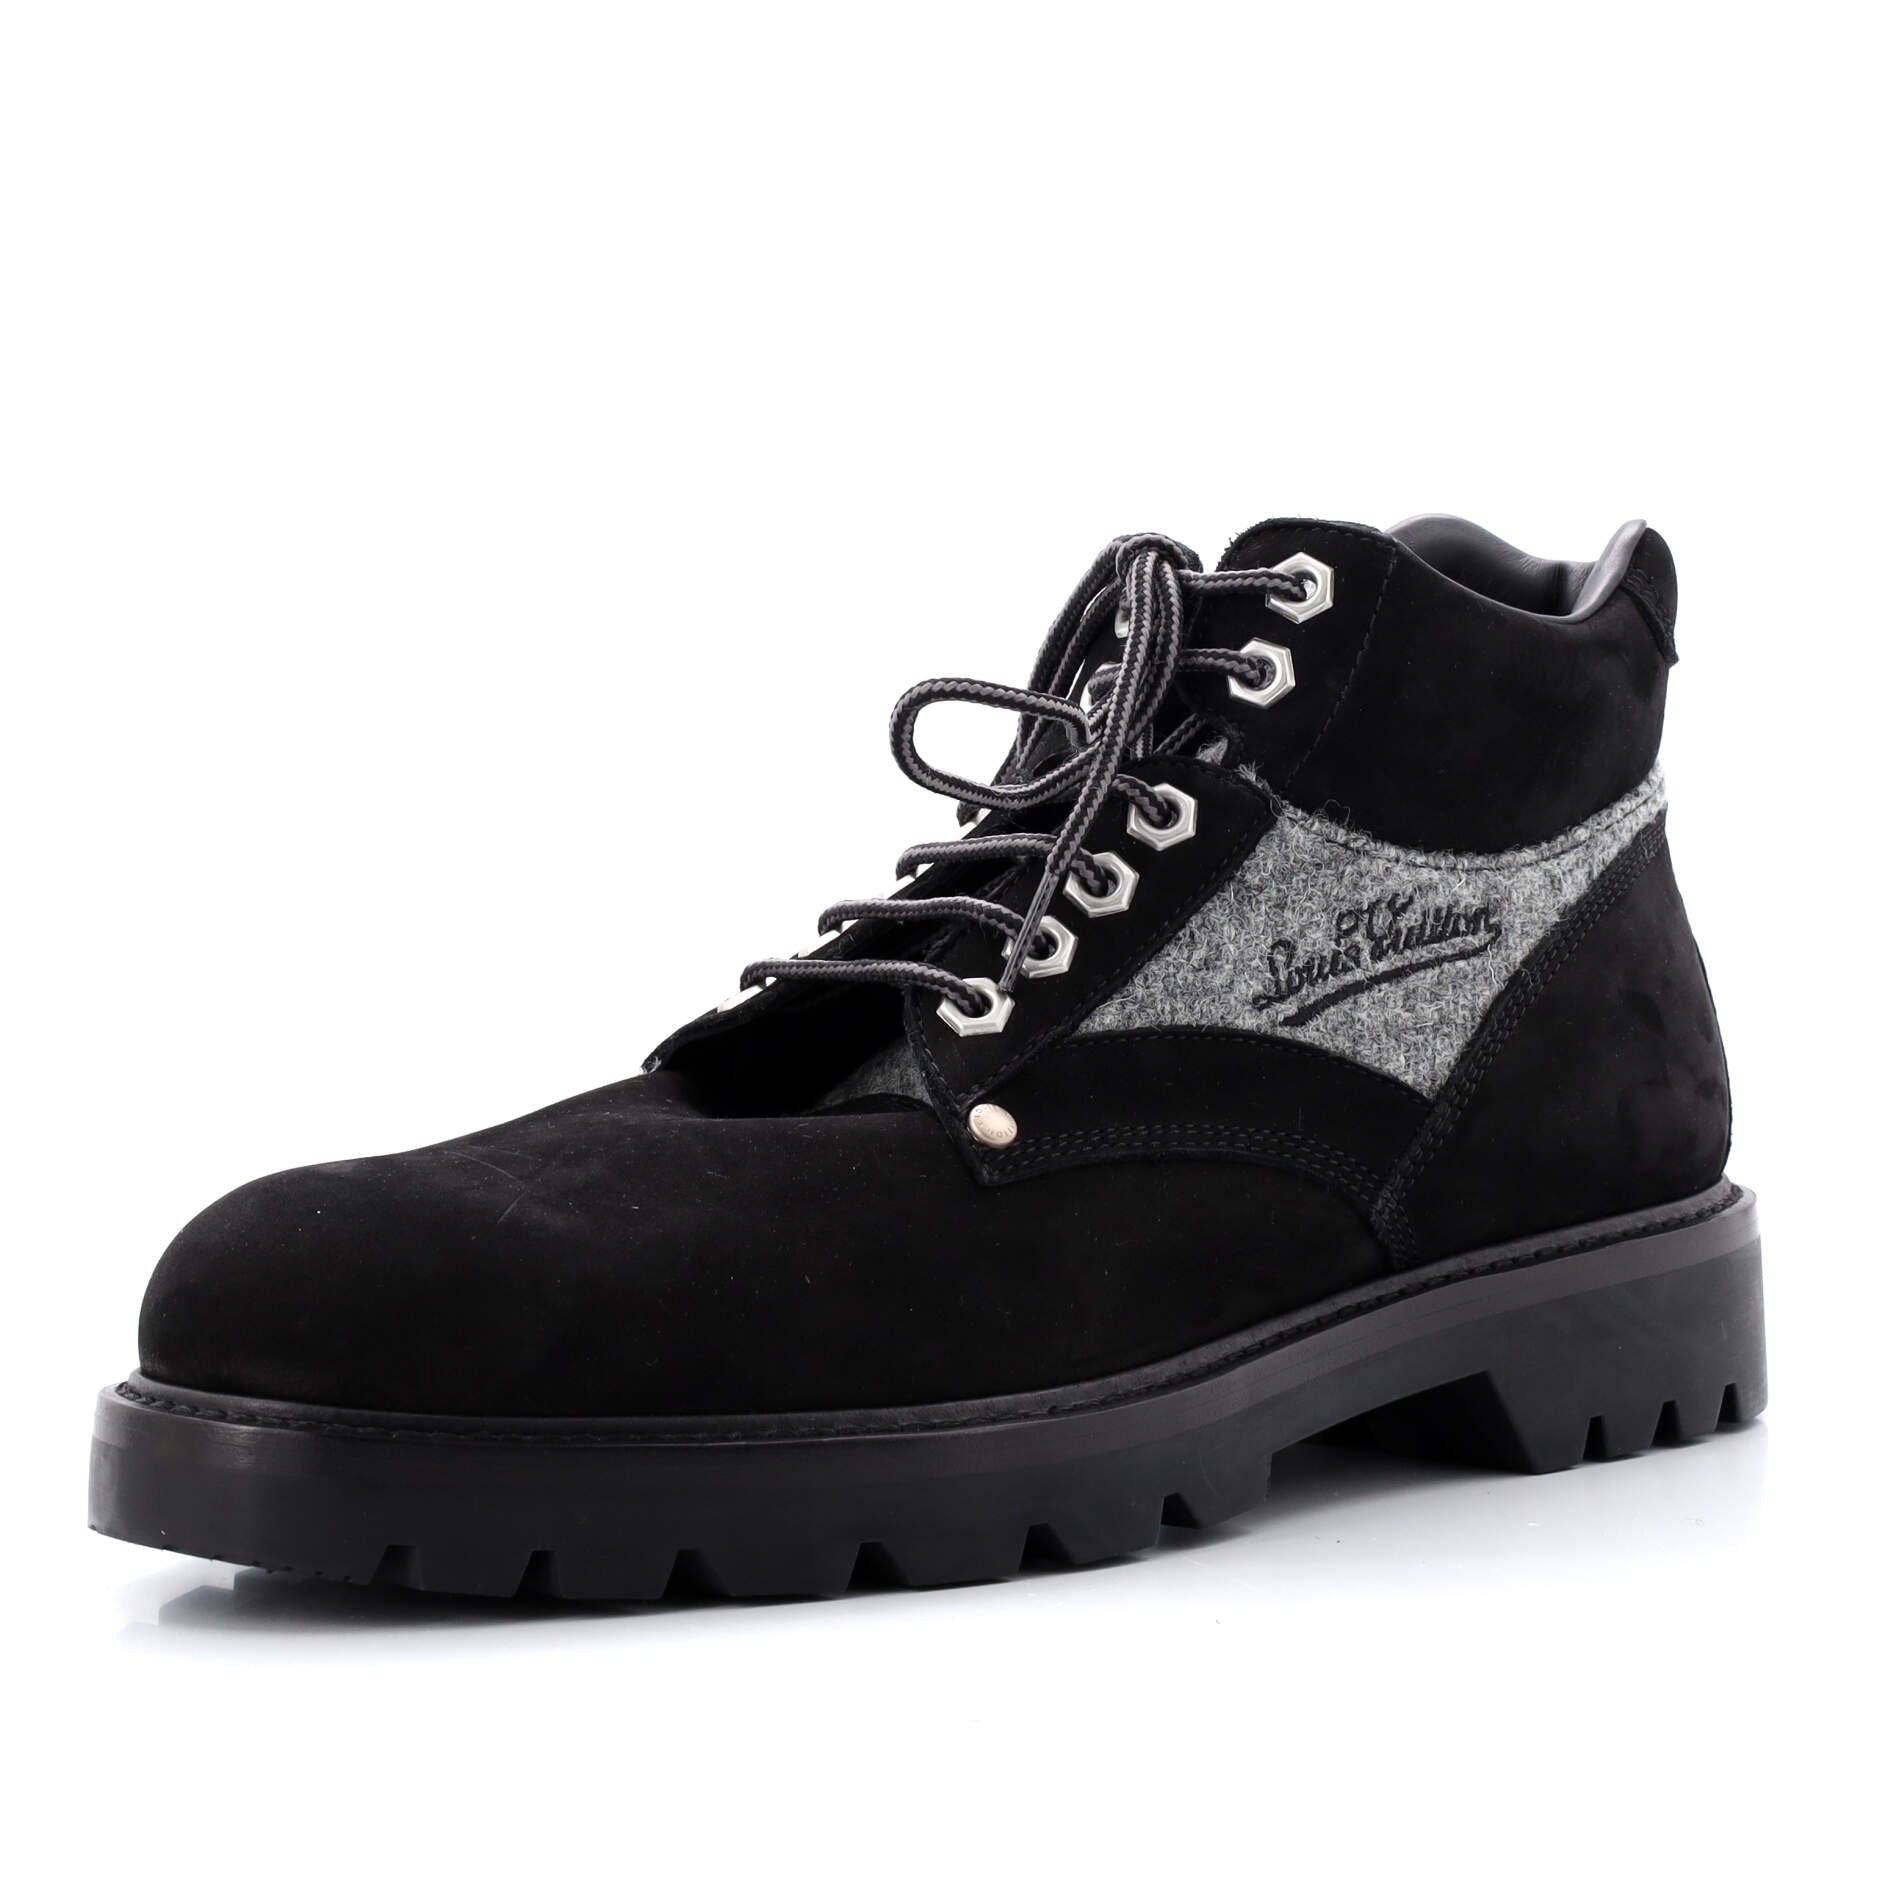 Oberkampf Ankle Boot